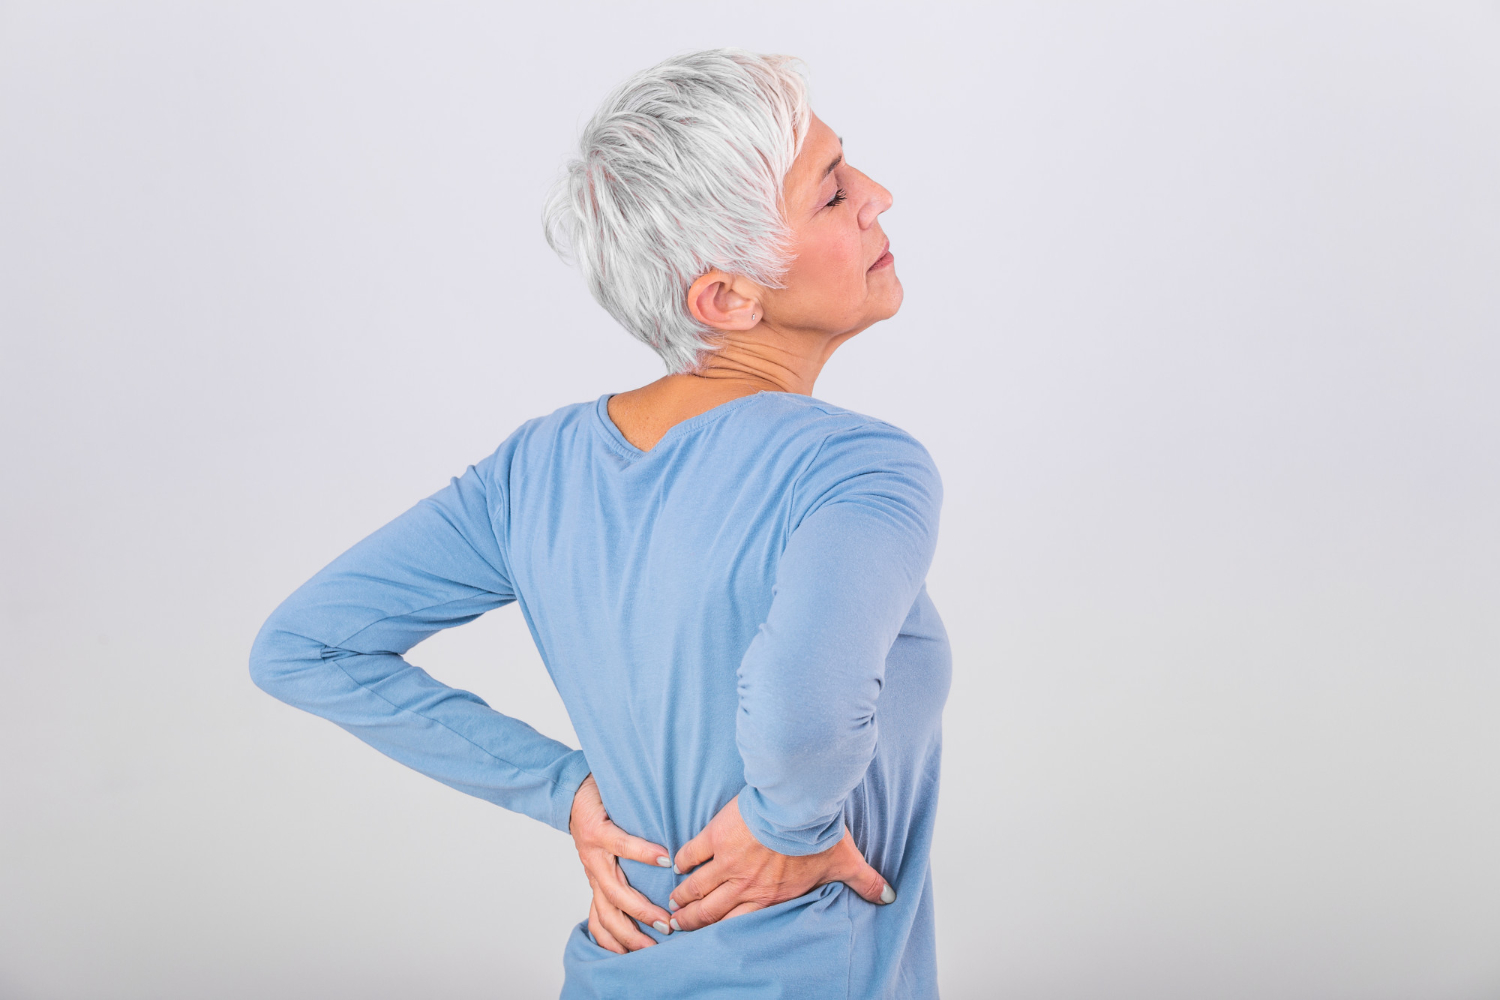 whats-the-outlook-for-people-with-sacroiliac-joint-pain